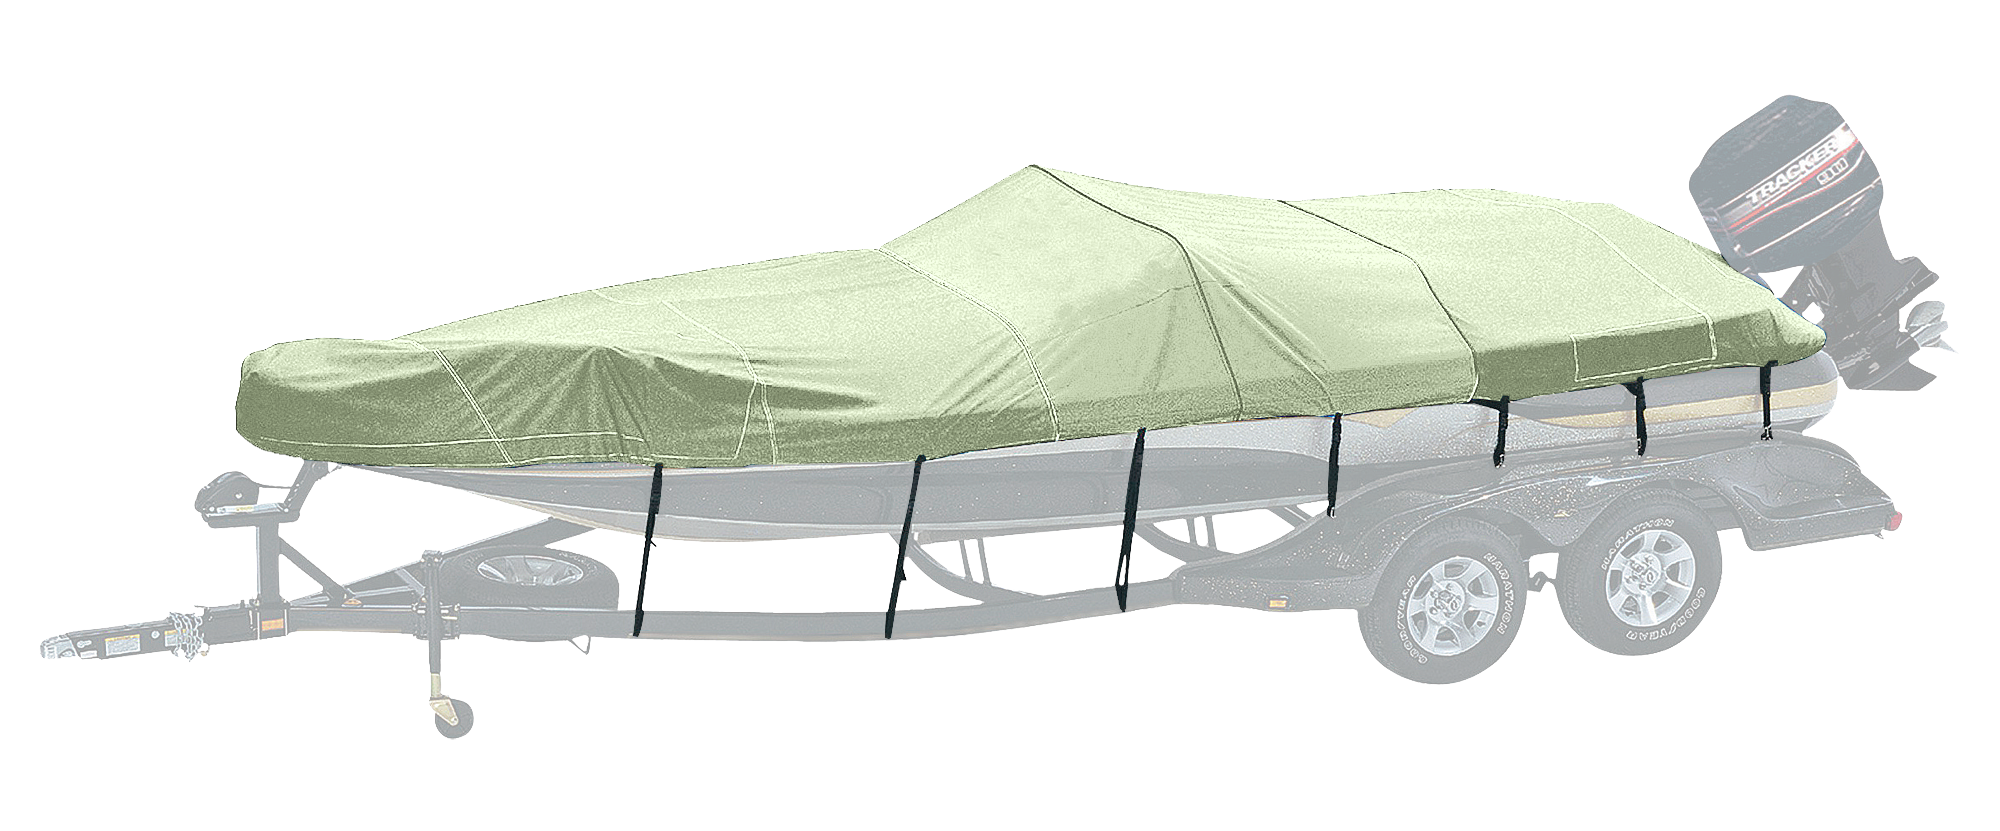 Bass Pro Shops Exact Fit Boat Cover by Westland - Tahoe Boats - 2005 195 Deckboat I/O - Linen